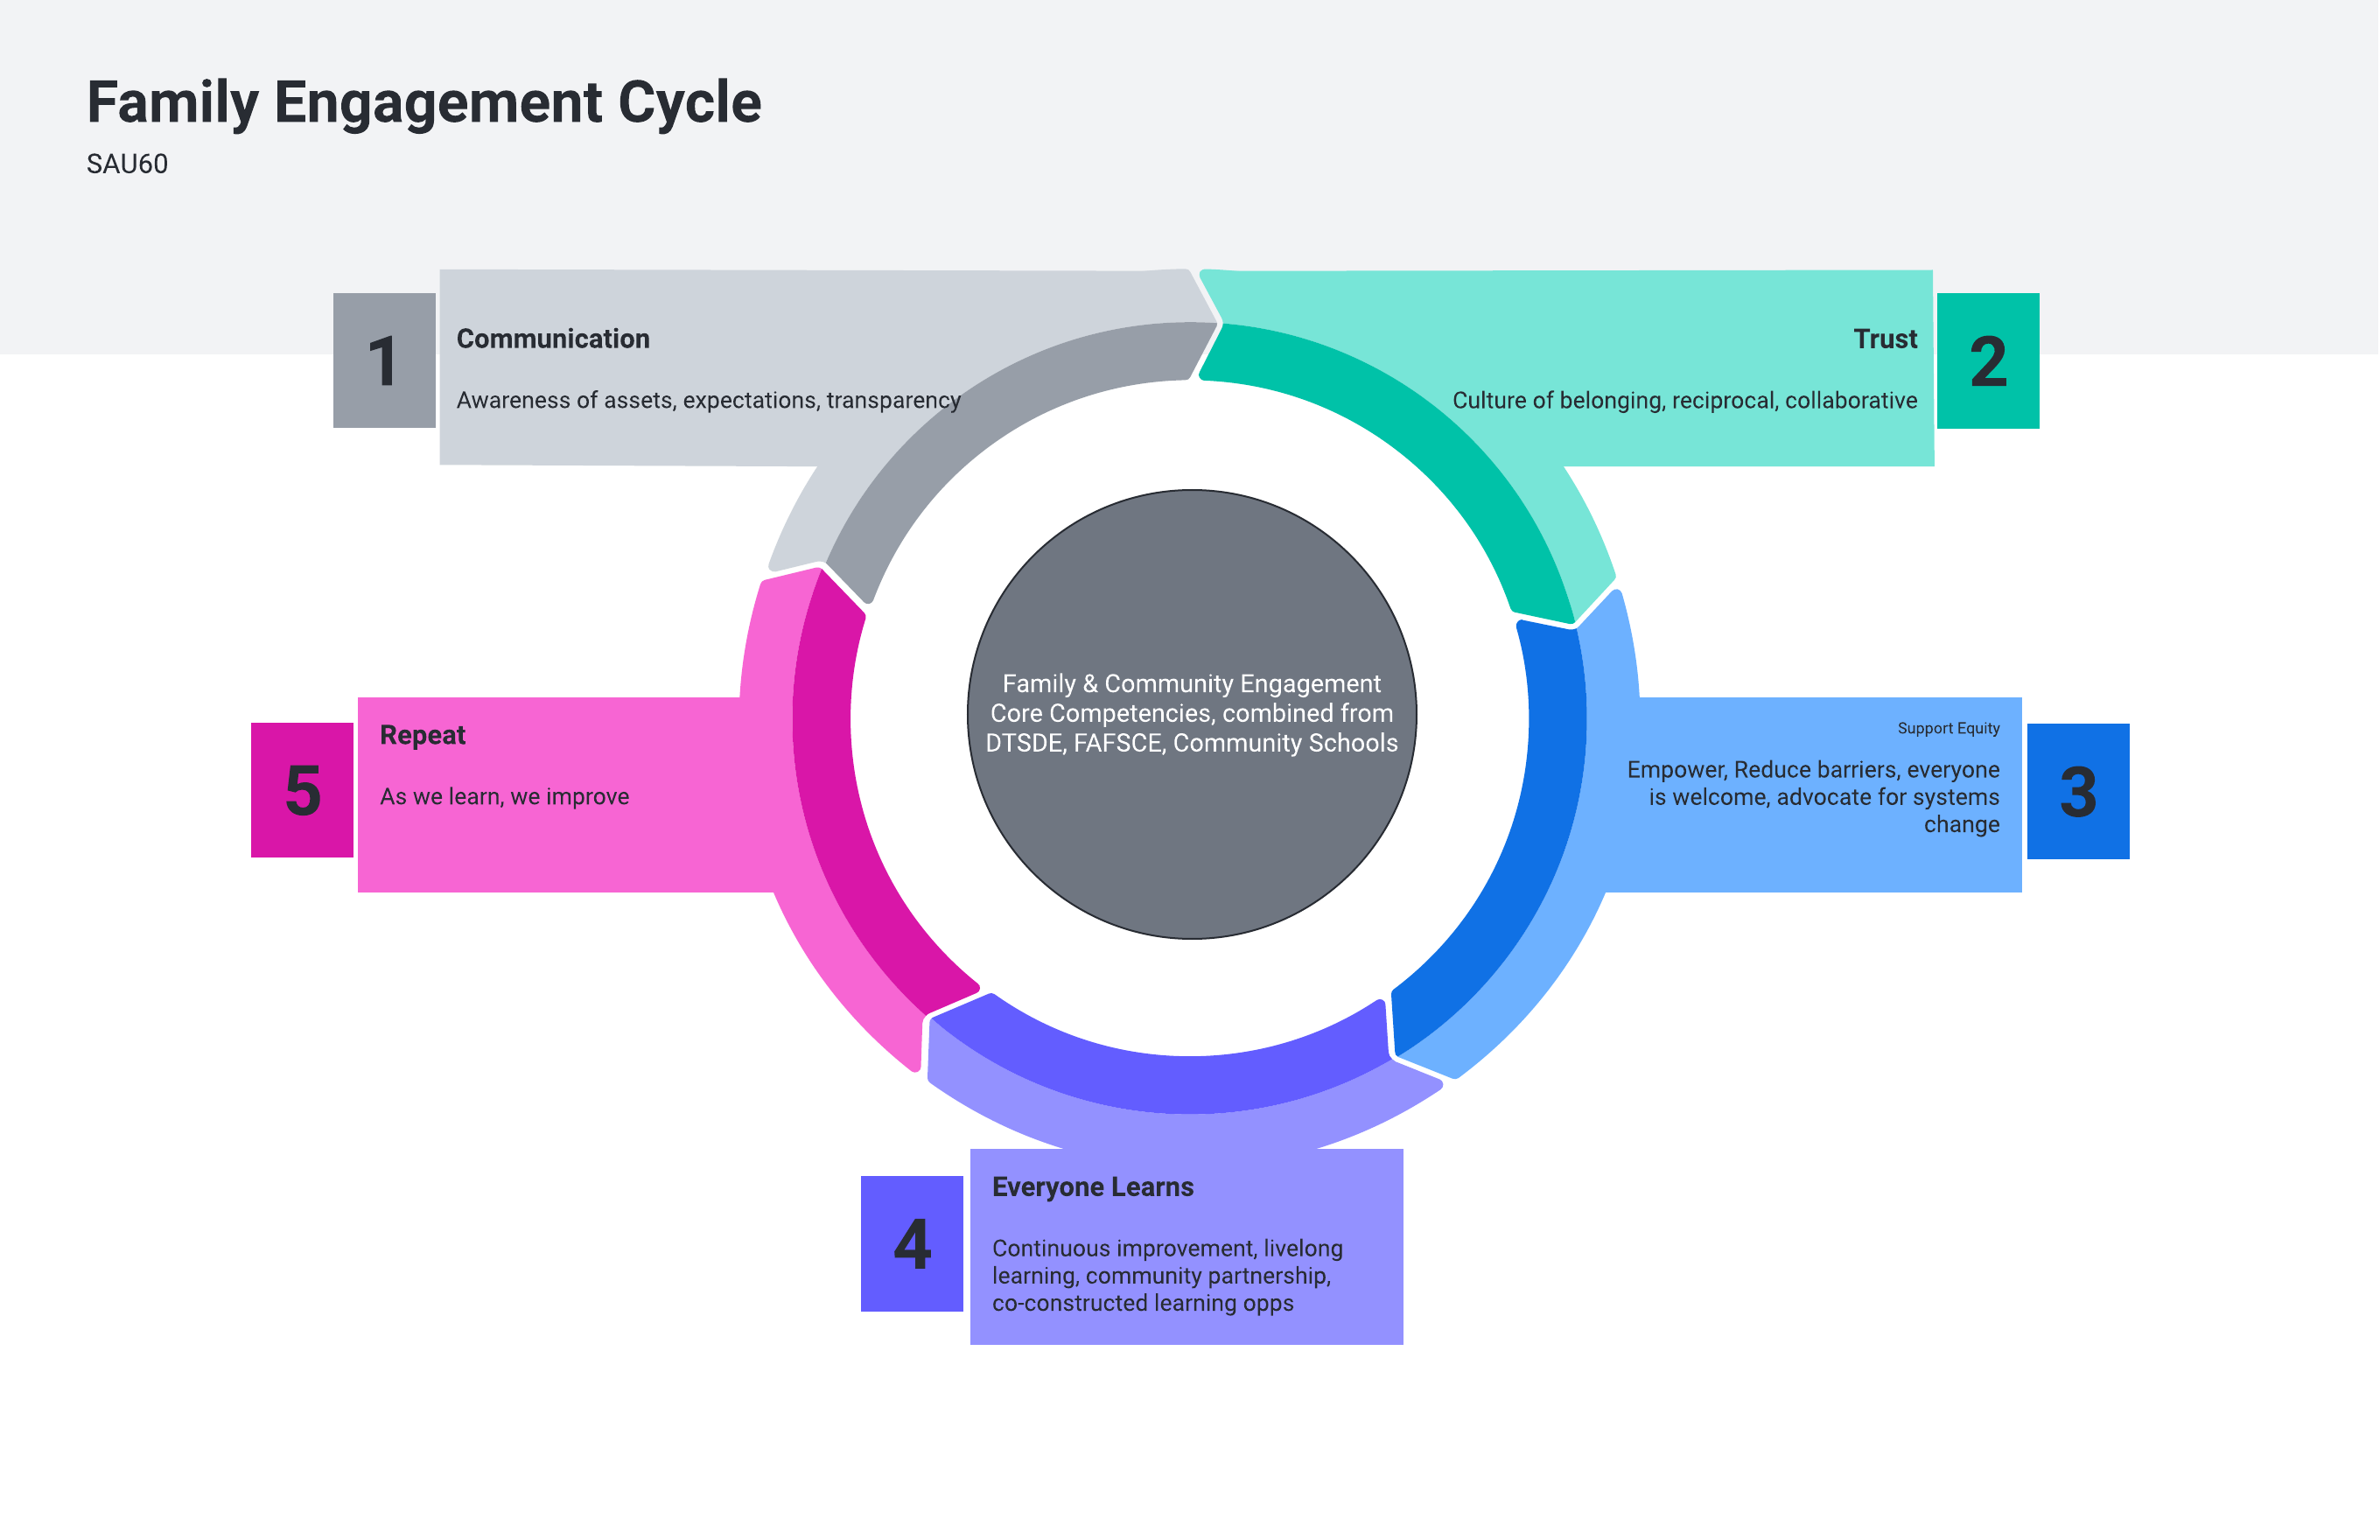 Diagram showing 5 stages: communication, trust, equity, learning, and repeating the cycle